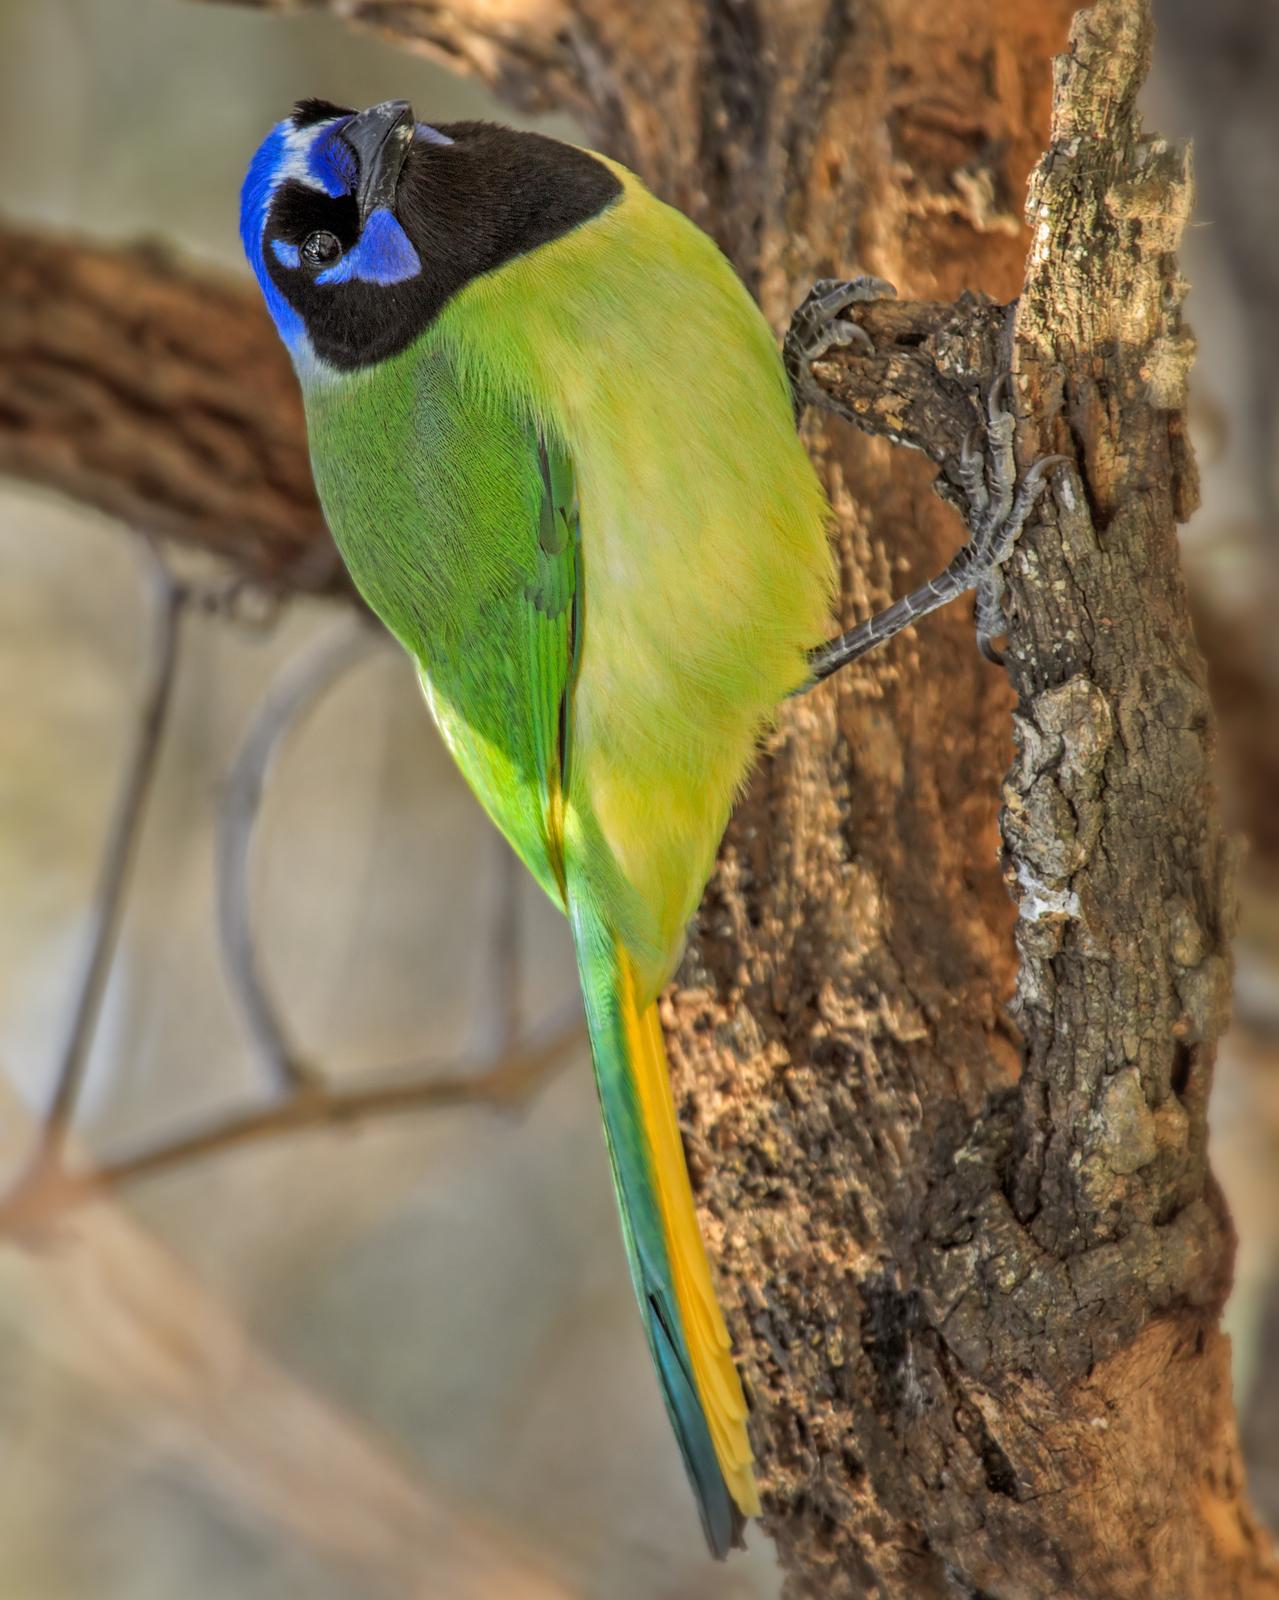 Green Jay Photo by JC Knoll